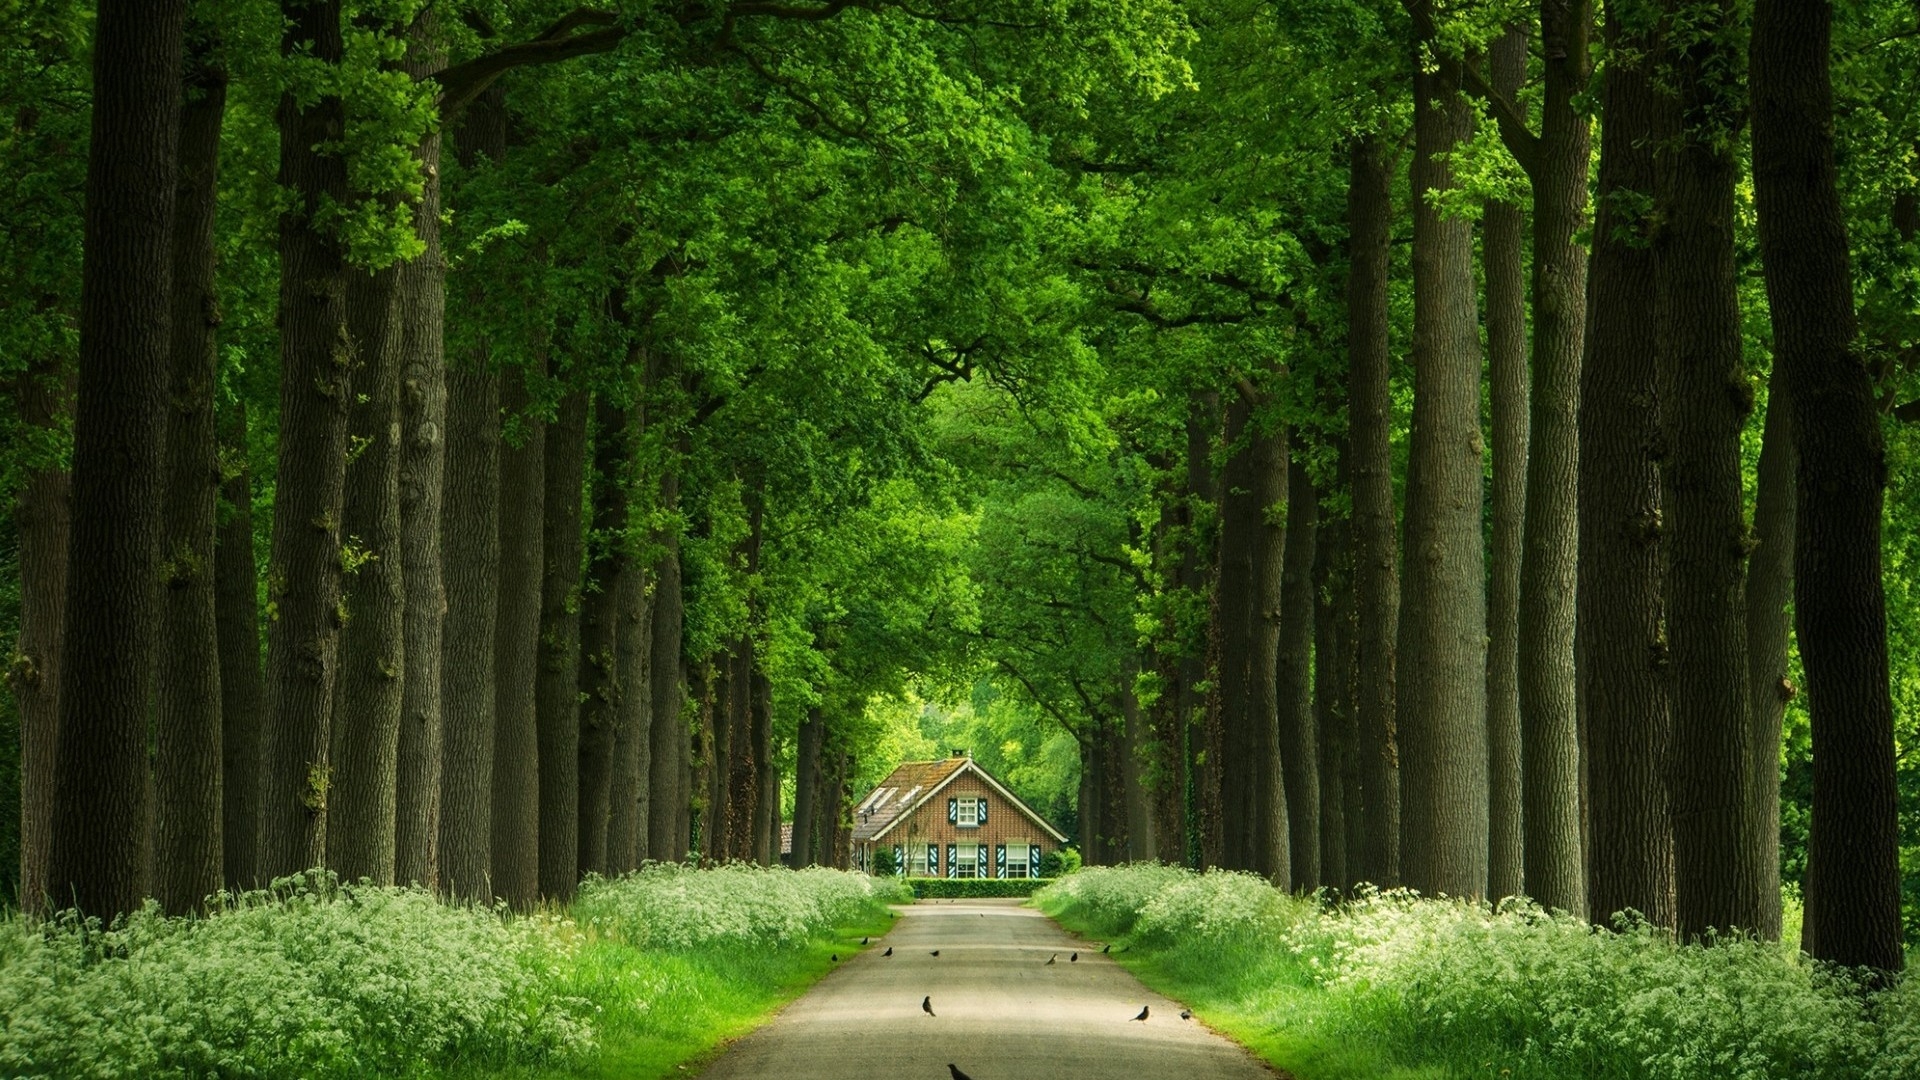 House at the End of Tree-Lined Street HD Wallpaper | Background Image